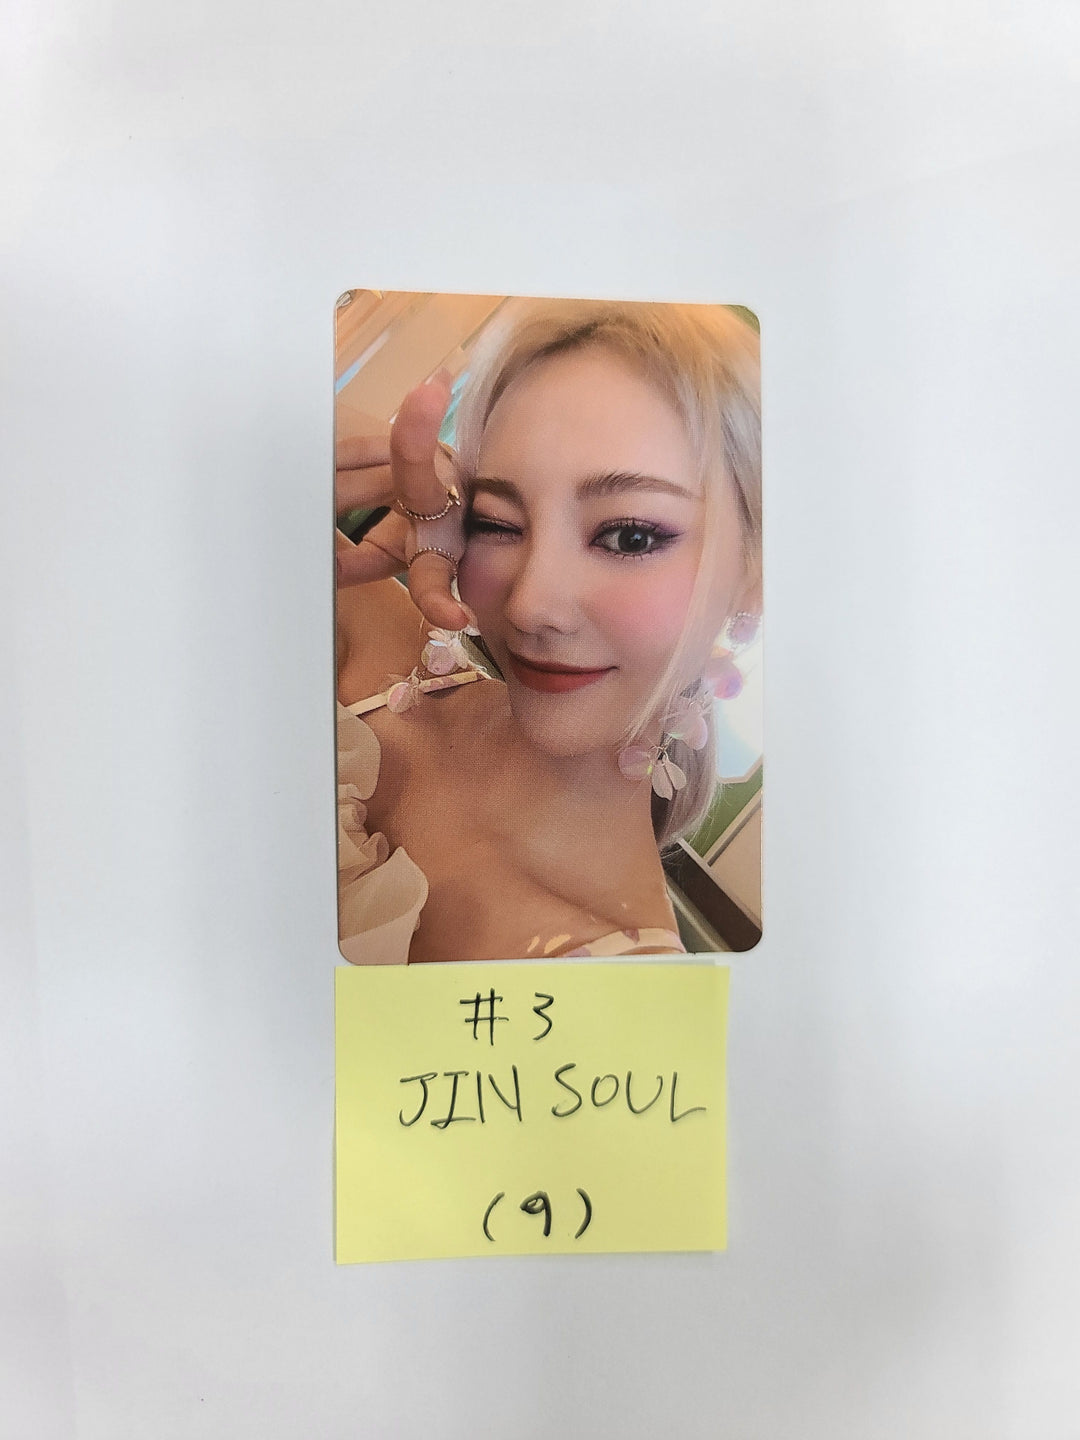 LOONA "Flip That" Summer Special Mini Album - Official Photocard [Jinsoul, Choerry]